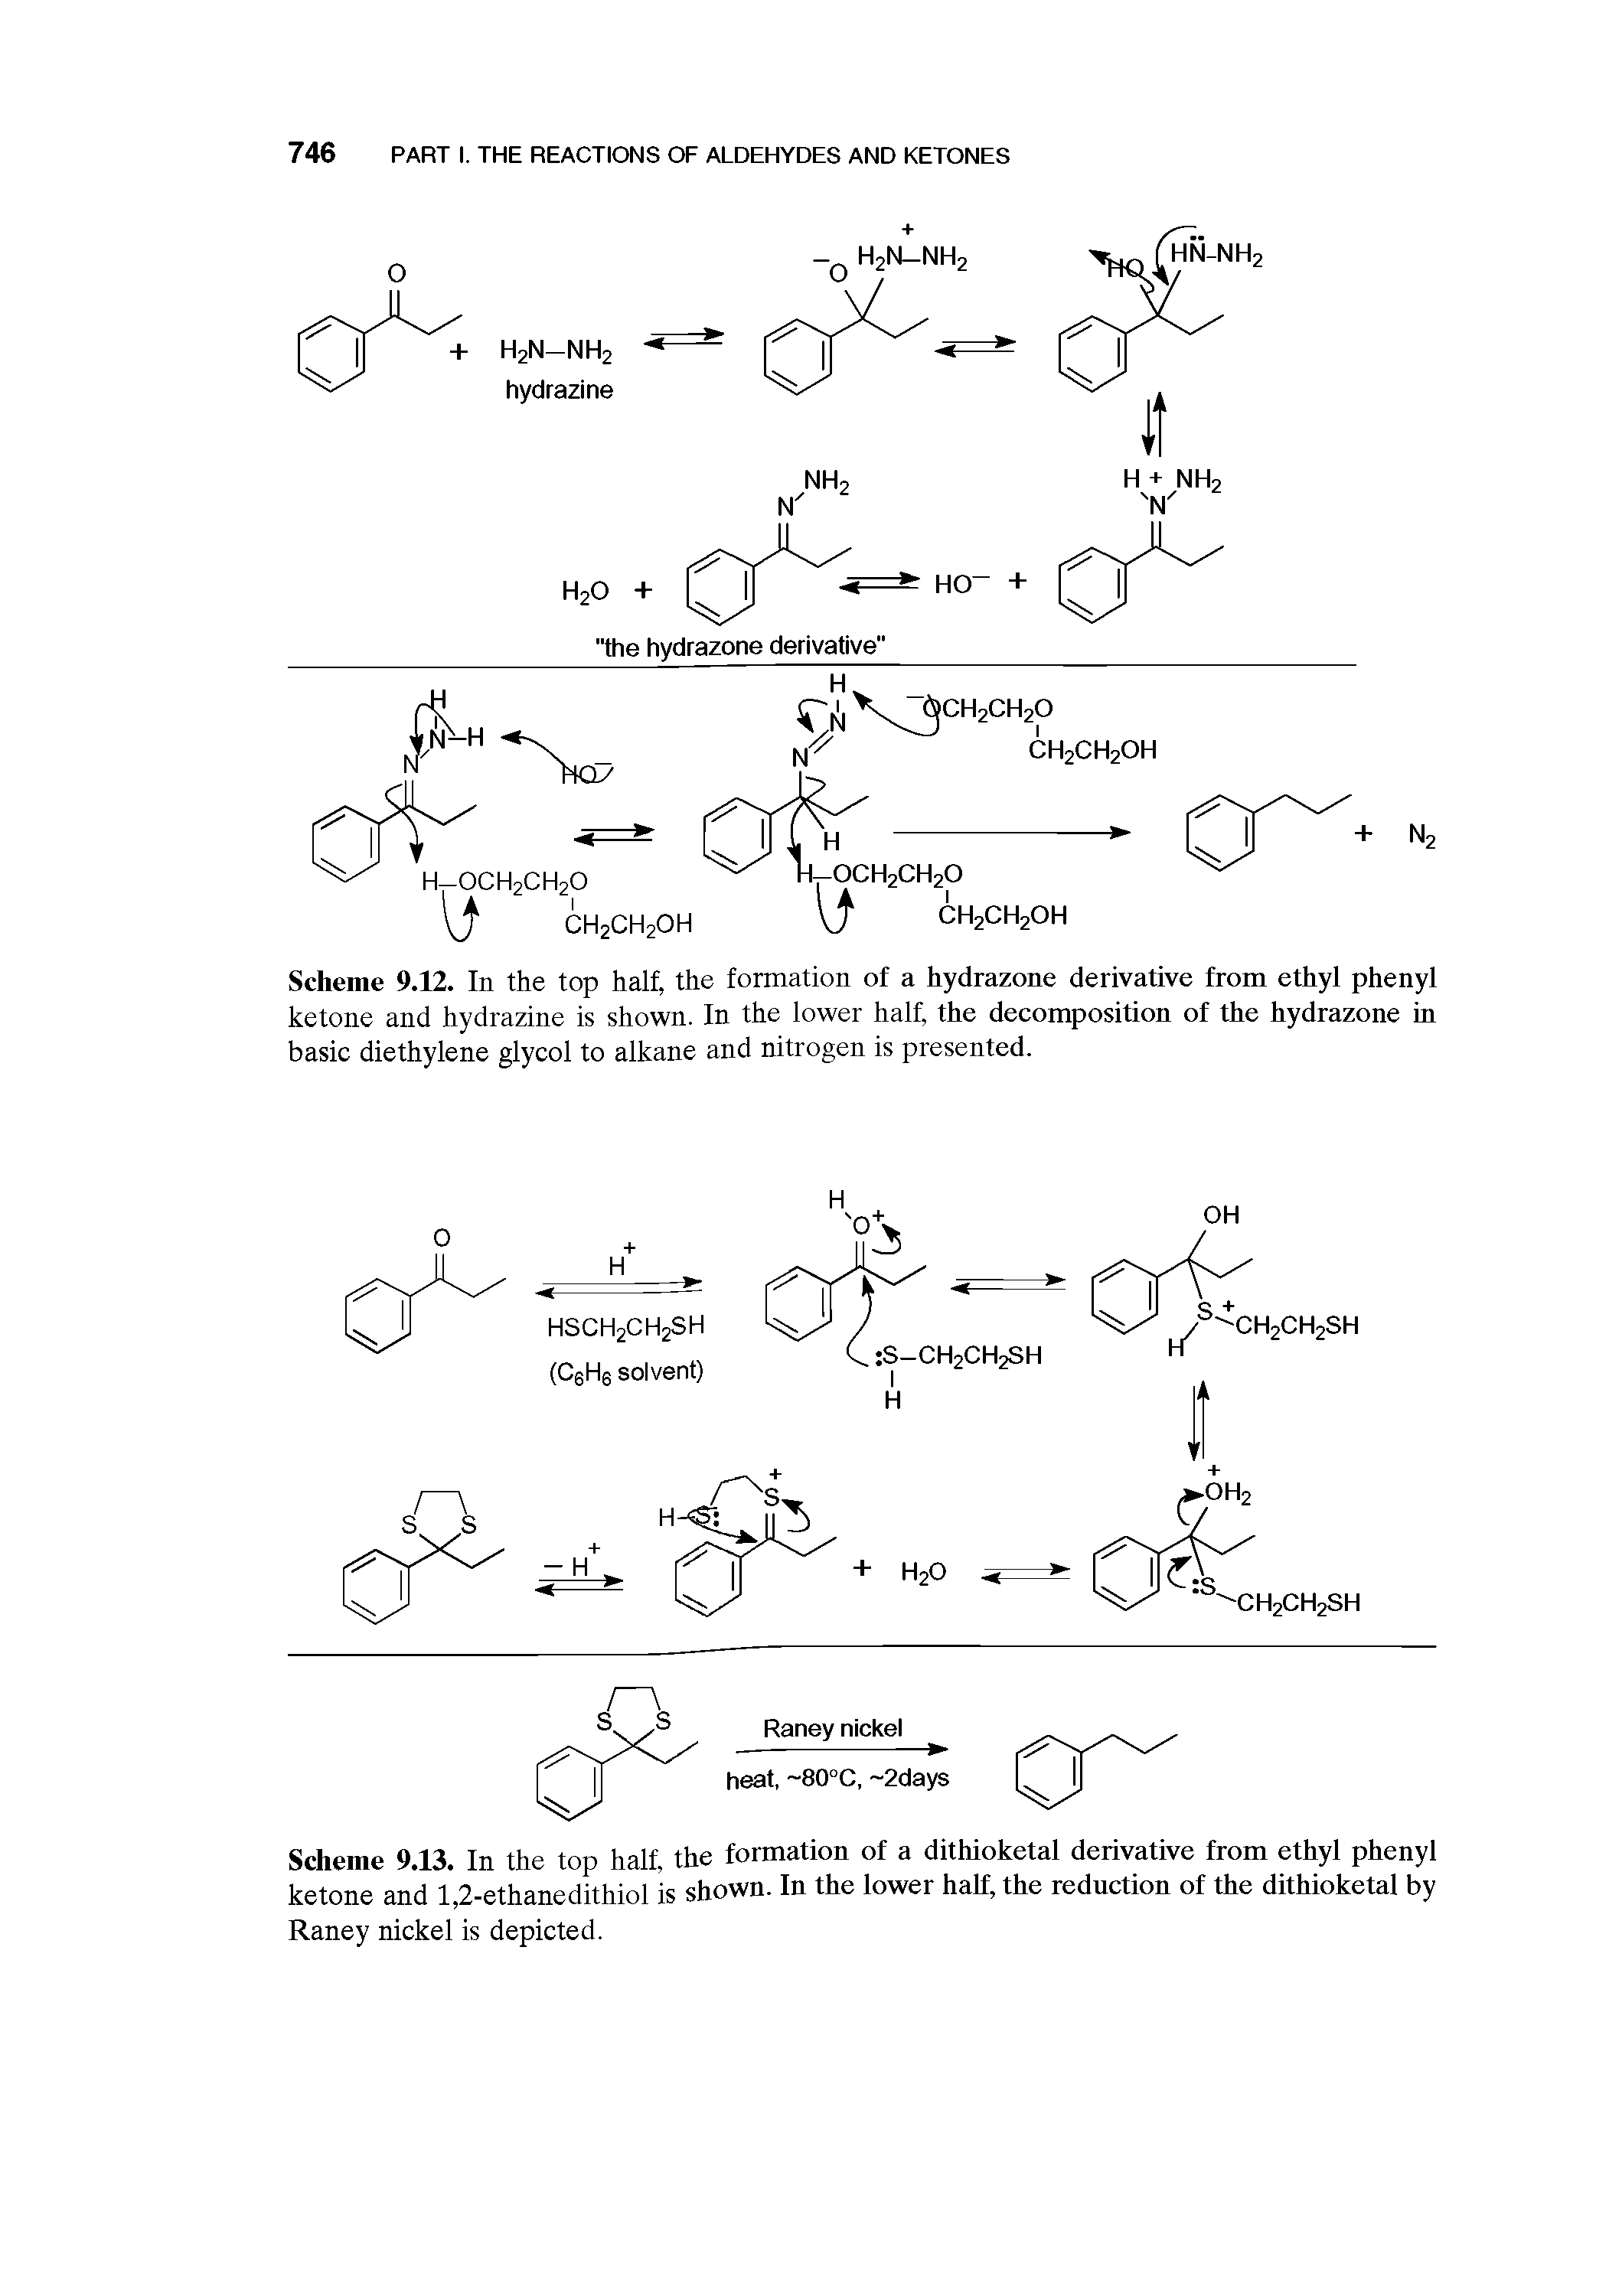 Scheme 9.12. In the top half, the formation of a hydrazone derivative from ethyl phenyl ketone and hydrazine is shown. In the lower half, the decomposition of the hydrazone in basic diethylene glycol to alkane and nitrogen is presented.